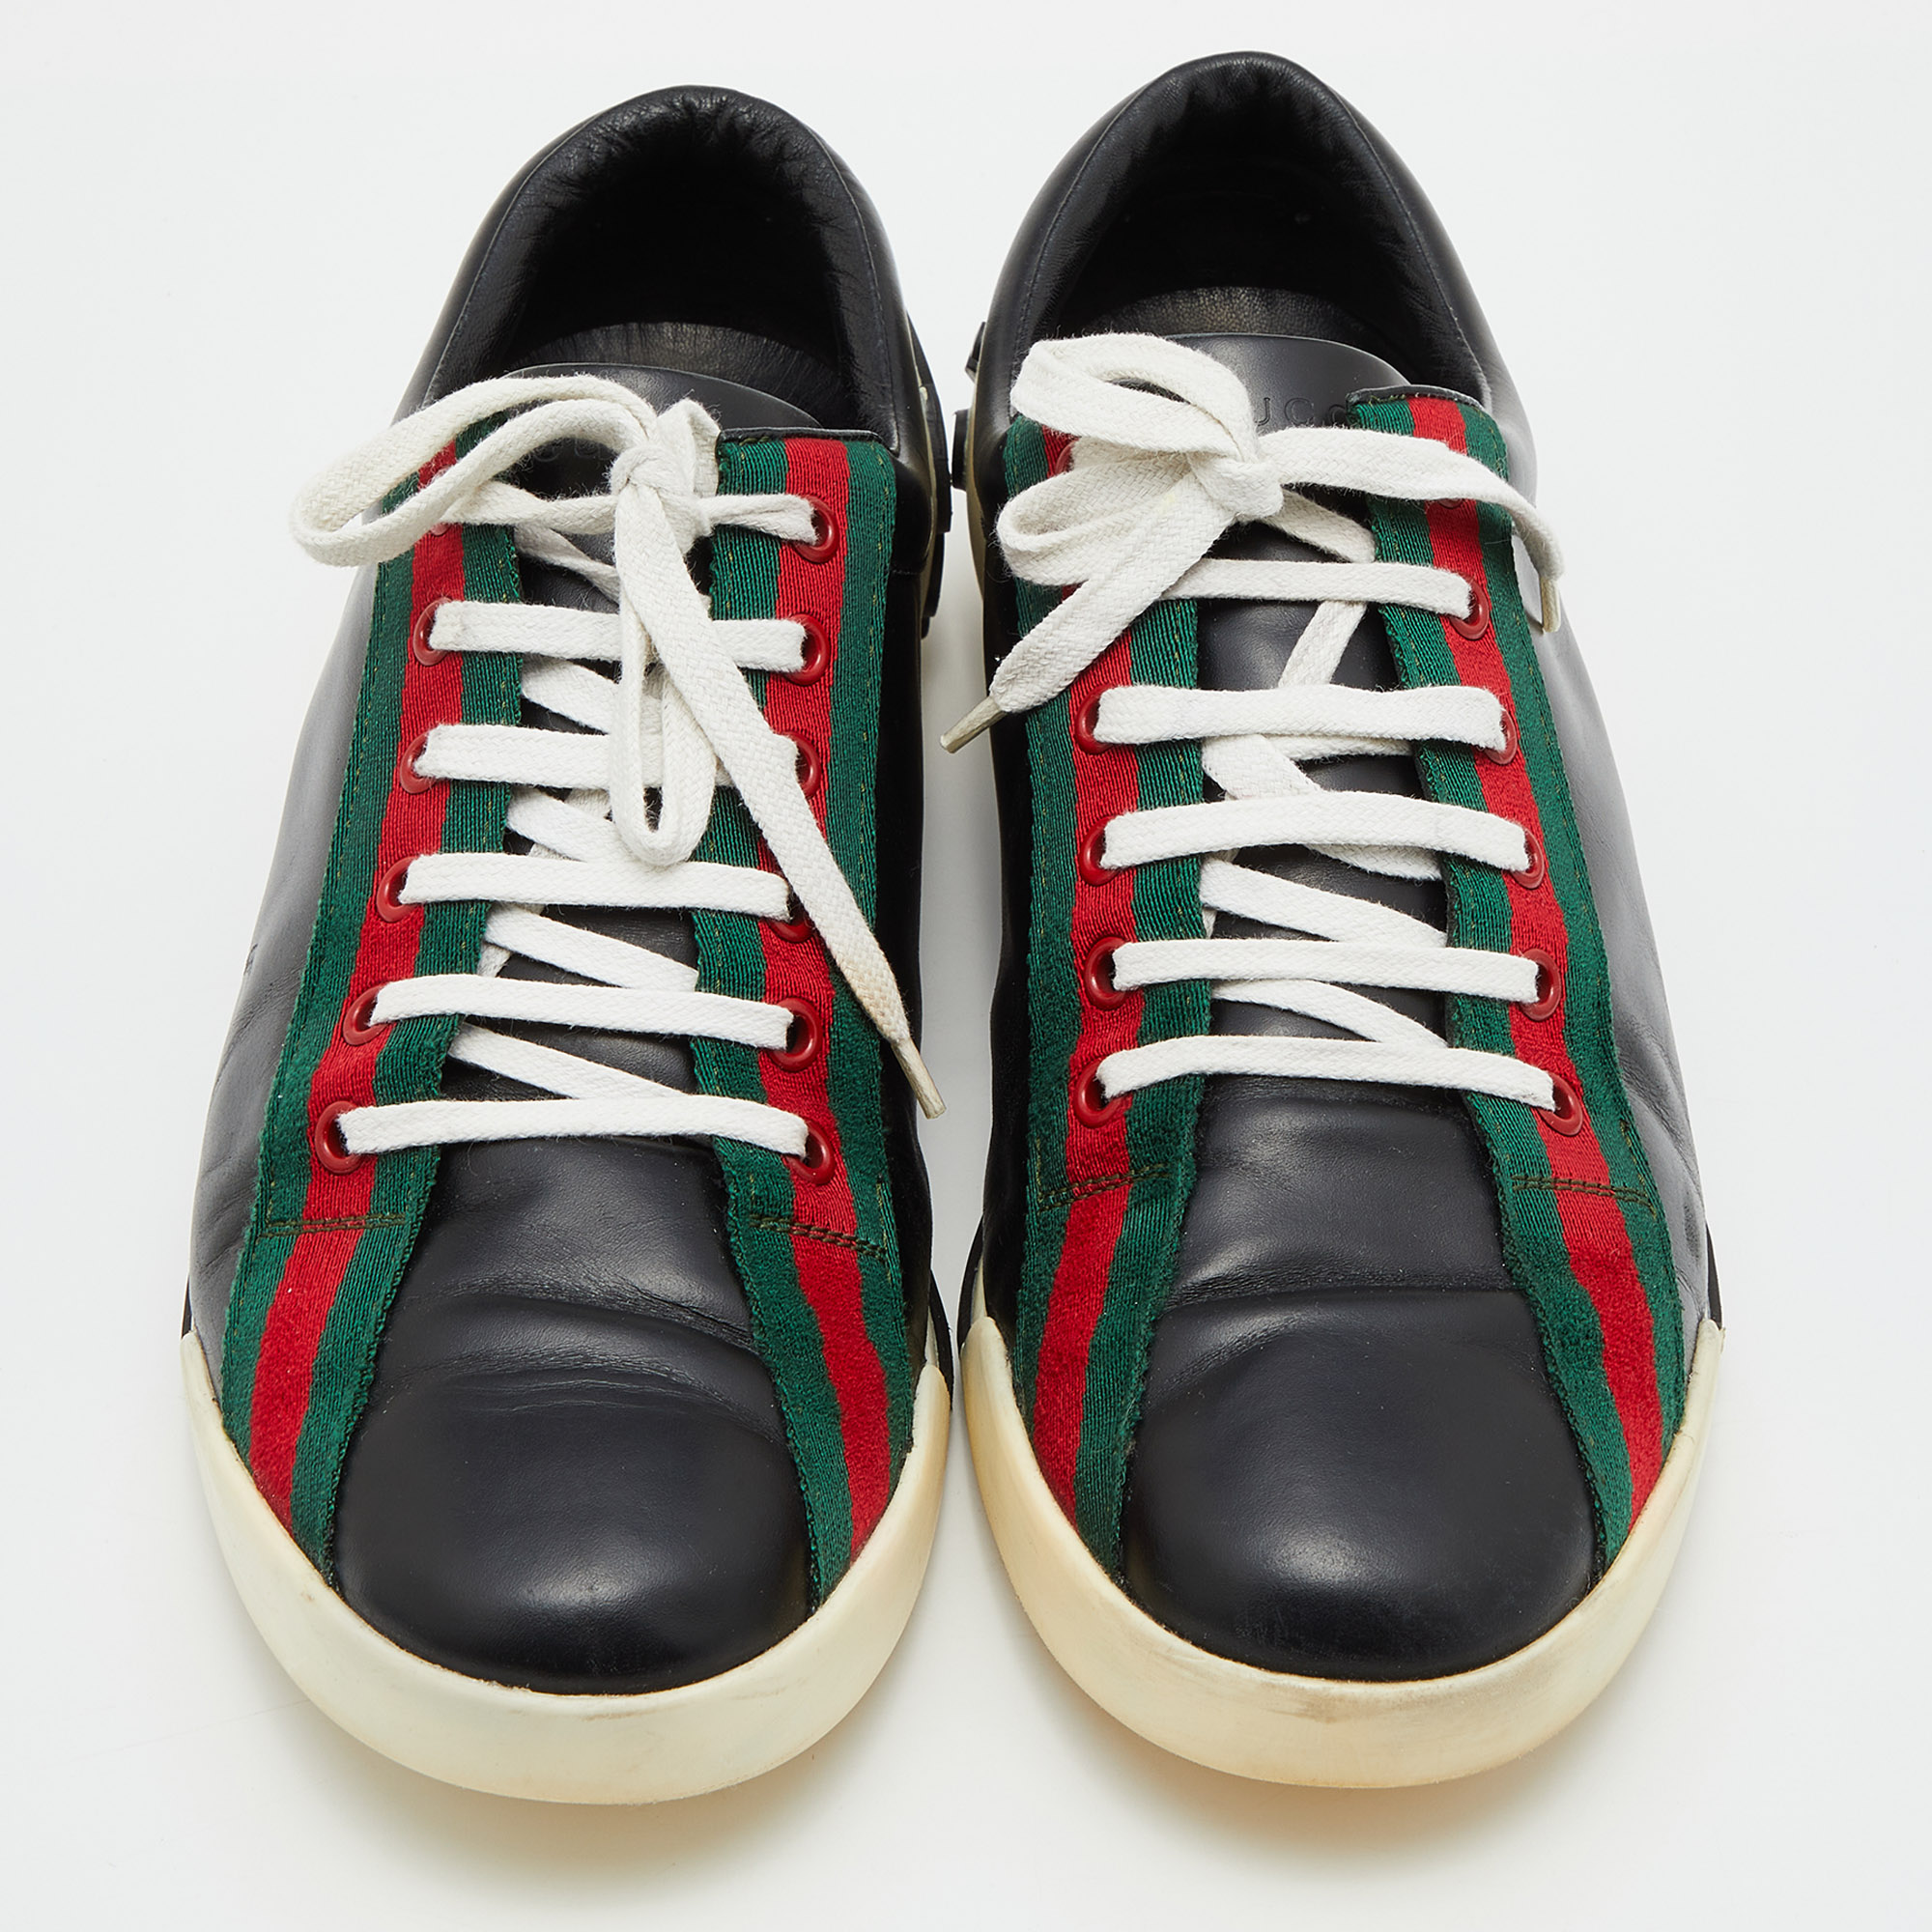 Gucci Black Leather Web Detail Low Top Sneakers Size 43